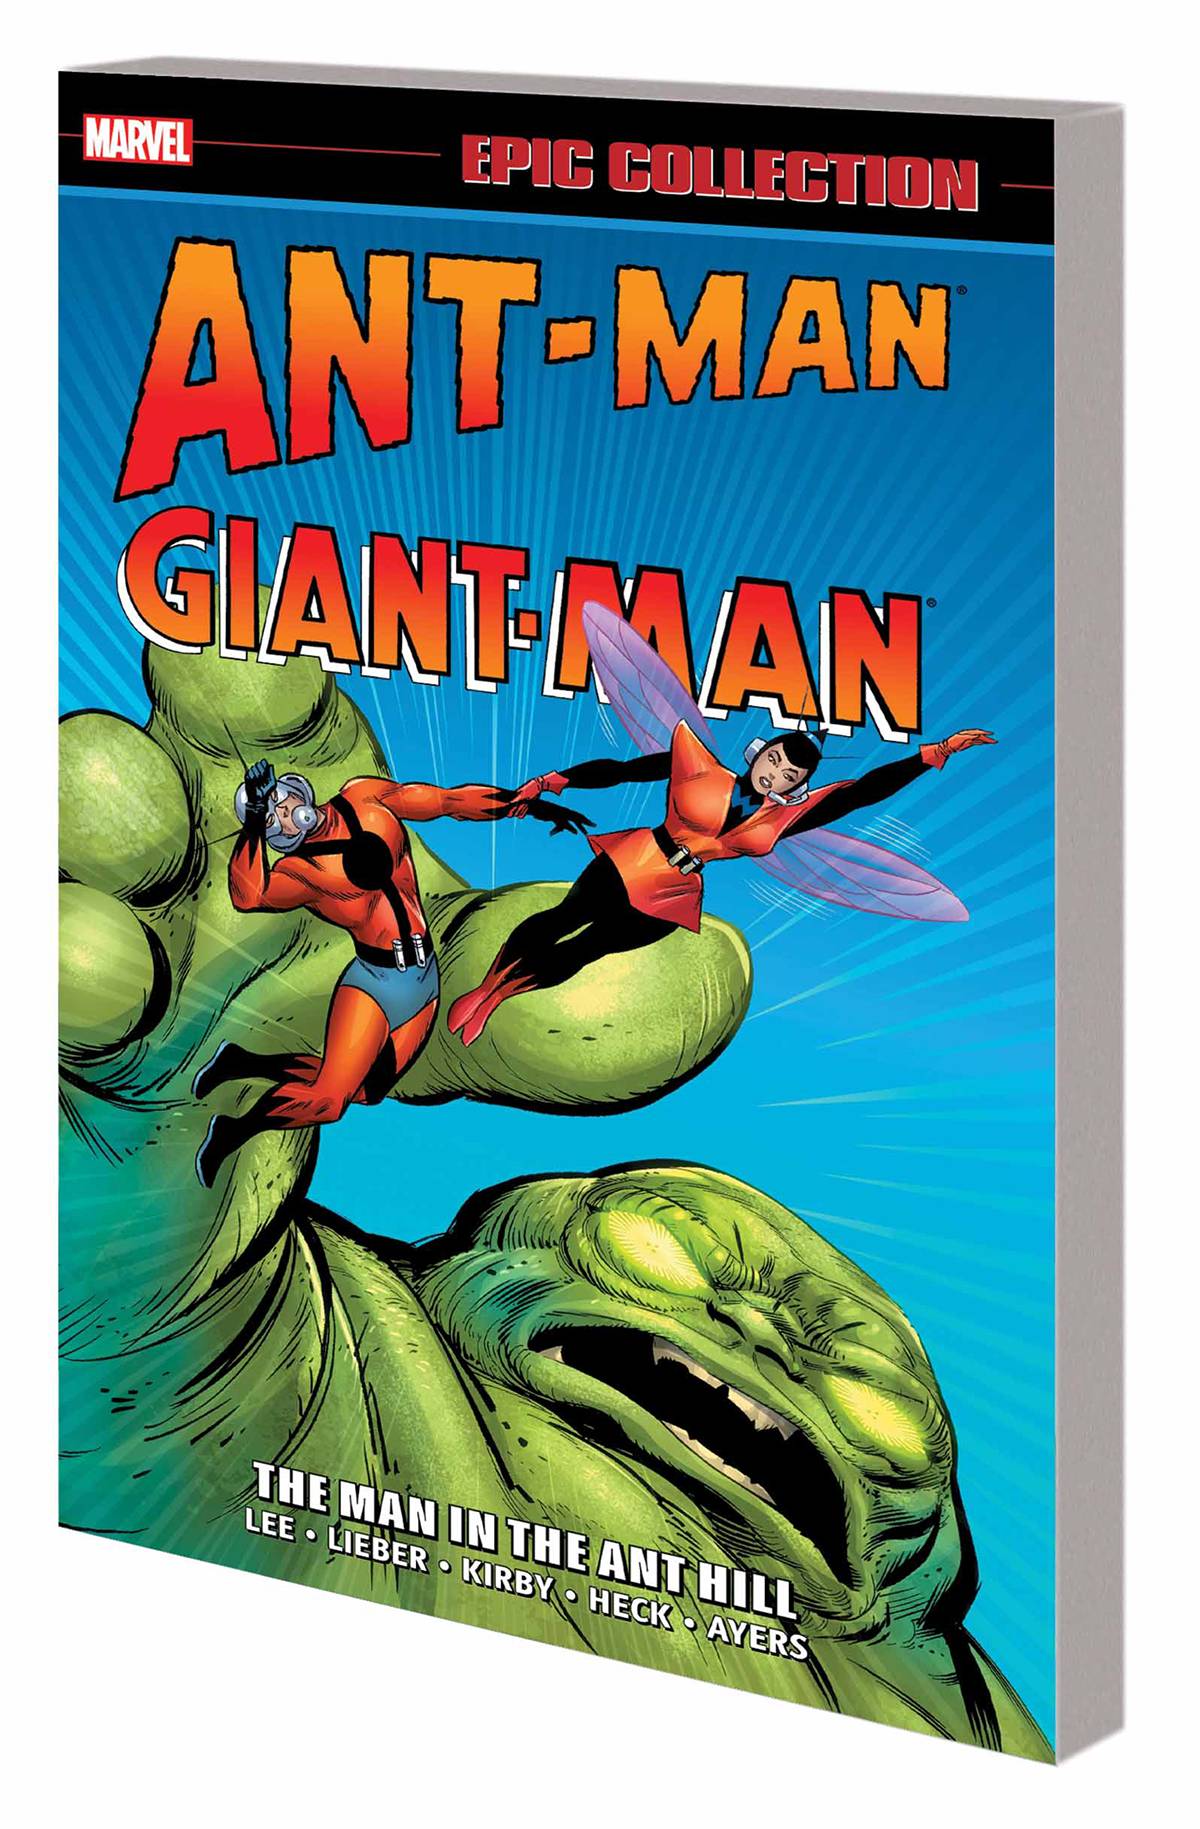 Ant-Man Giant-Man Epic Collection Graphic Novel Volume 1 Man In Ant Hill